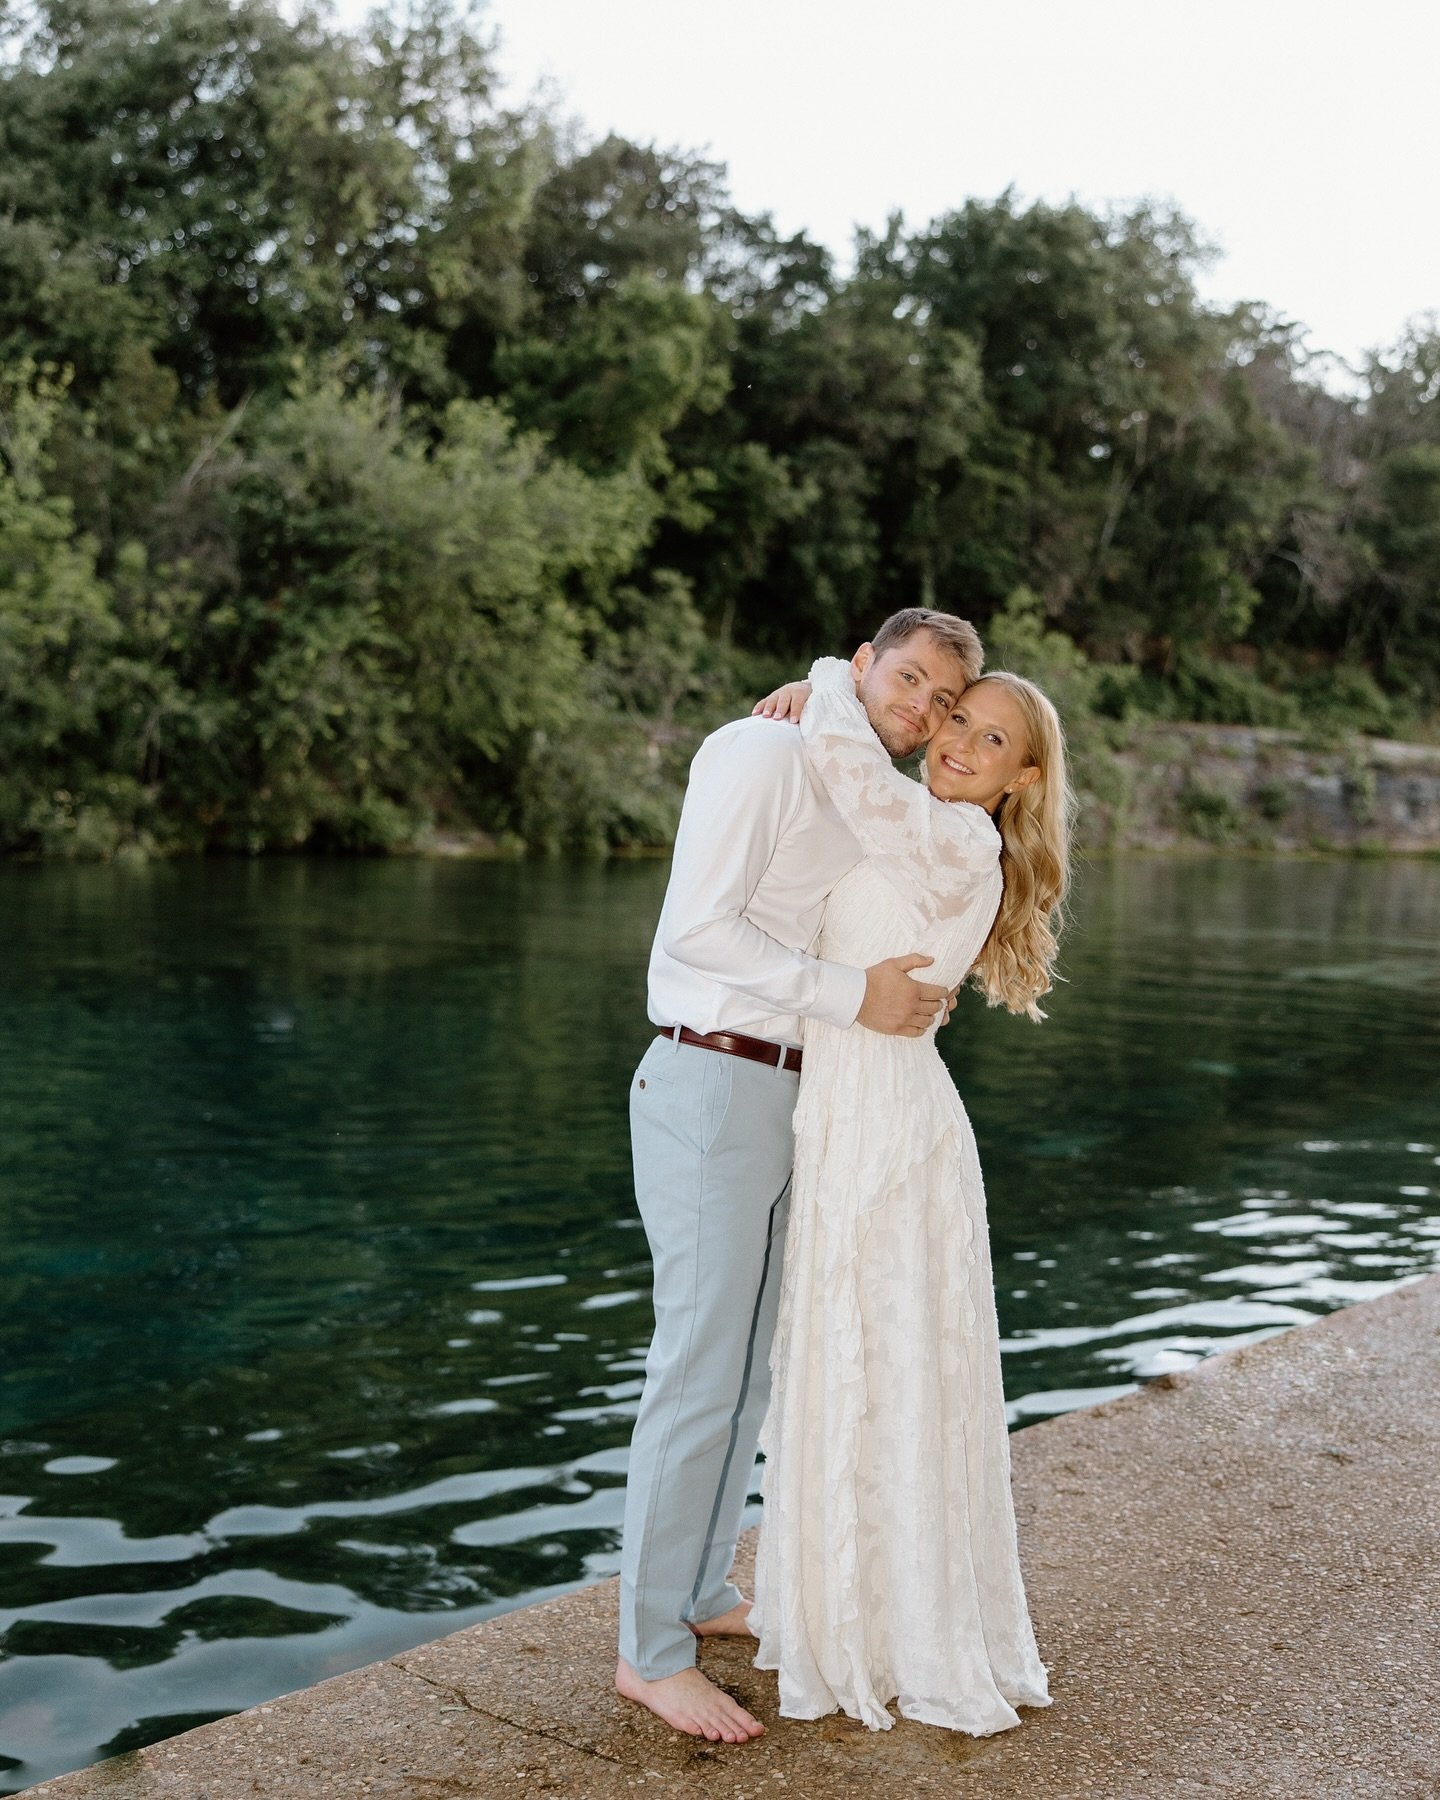 really need to do better about posting so here you go !!!

#texasweddingphotographer #texasweddingvideographer #austinweddingphotographer #austinengagementphotographer #austinweddingvideographer #austinwedding #destinationweddingphotographer #destina